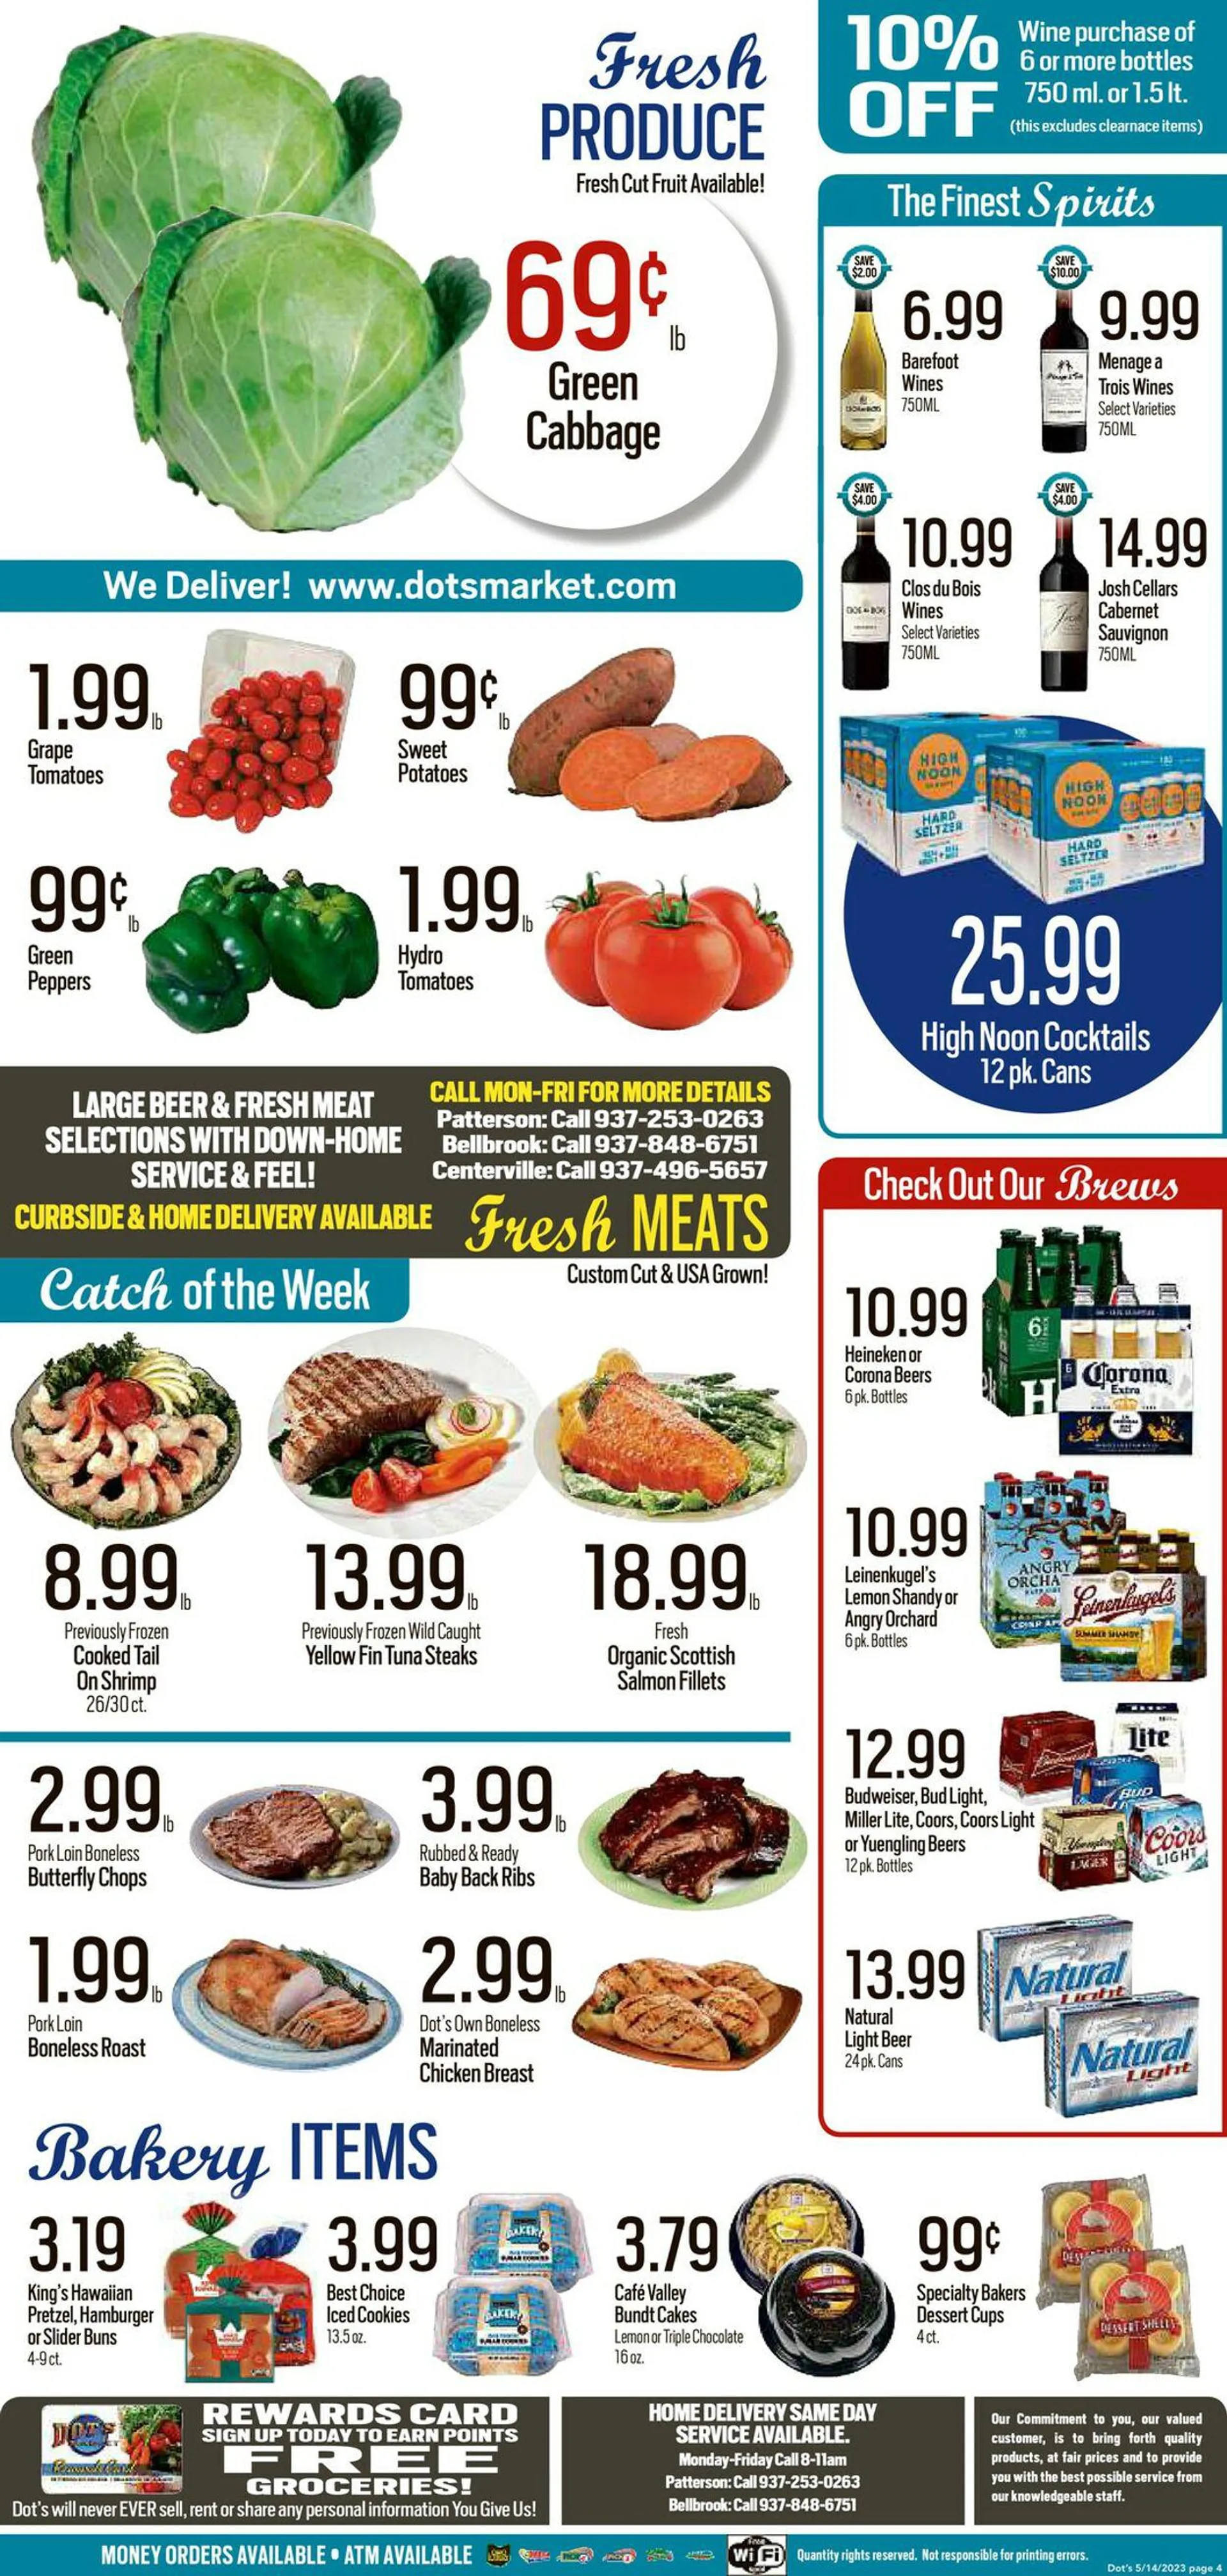 Dots Market Current weekly ad - 4